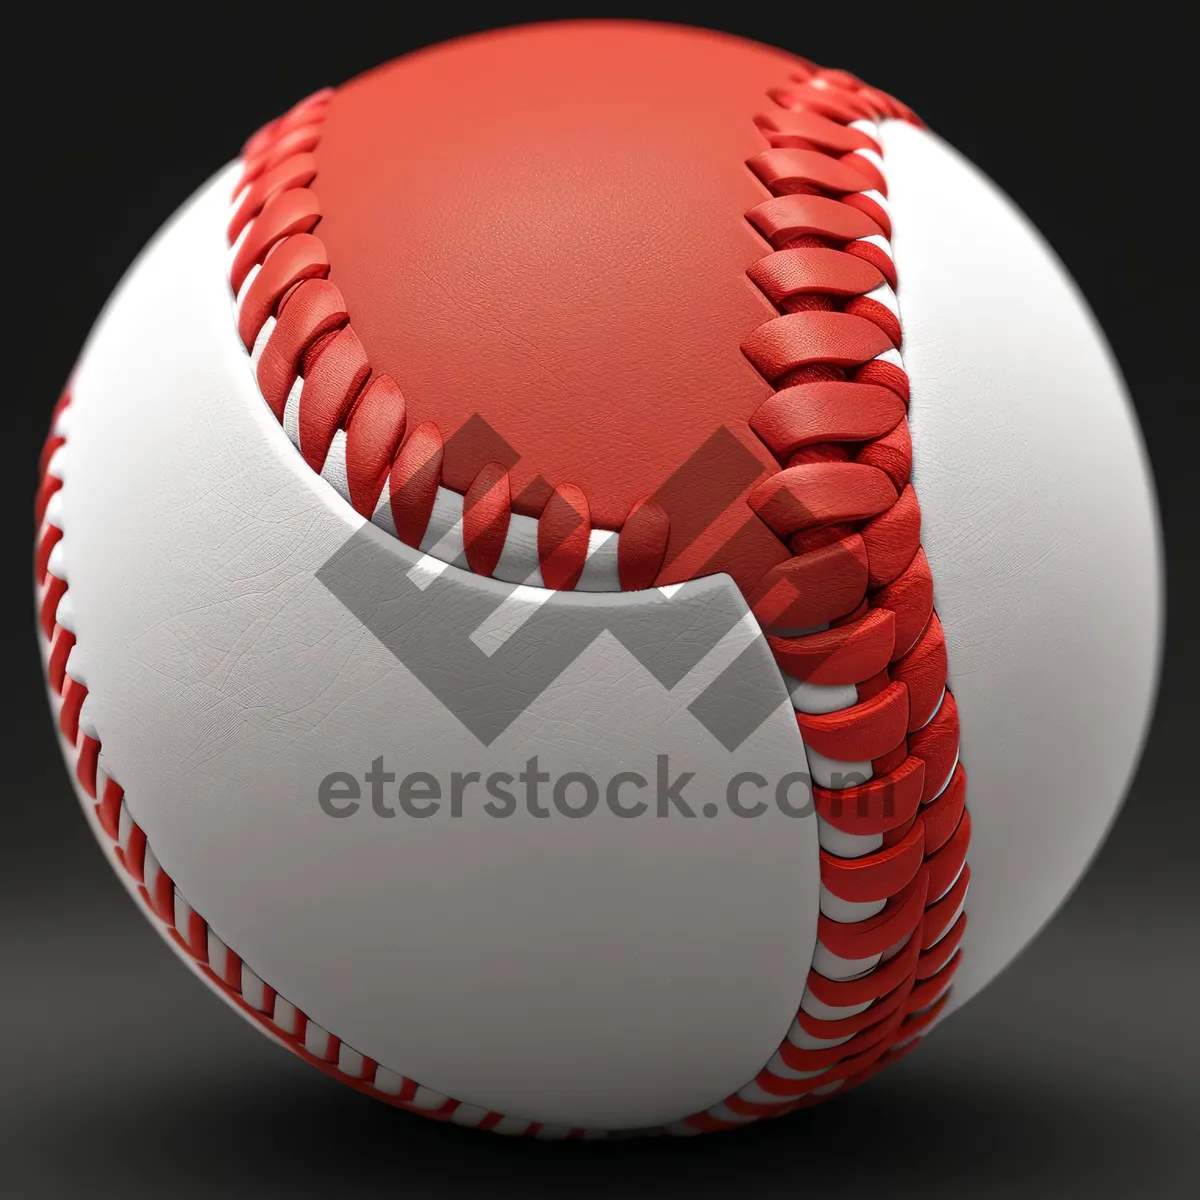 Picture of Baseball Leather Ball - Game Equipment for Sports